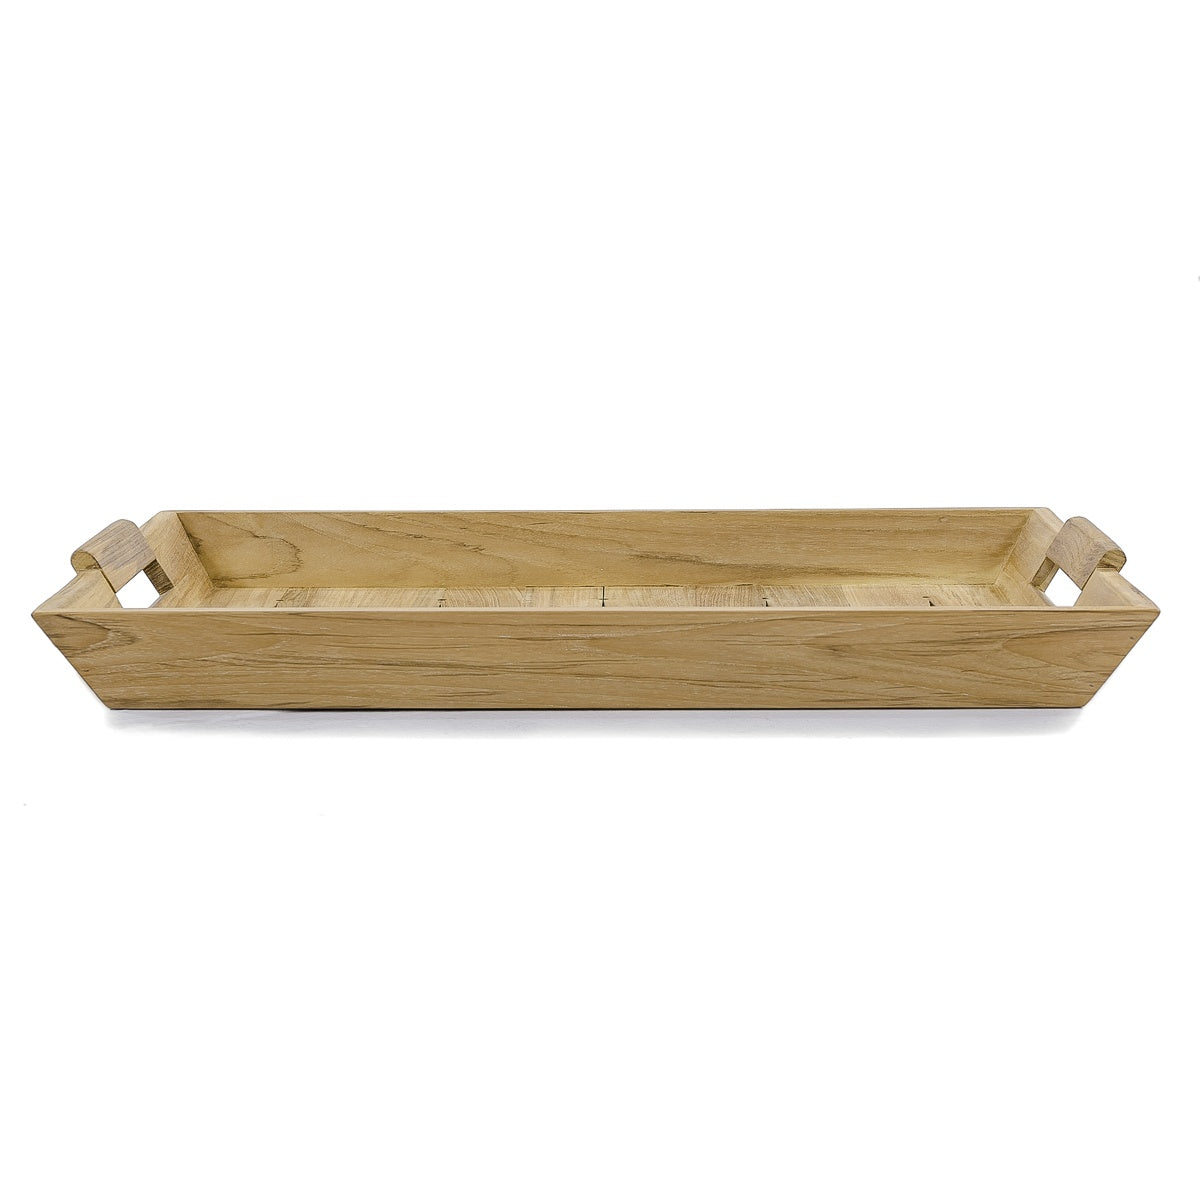 Westminster Teak - Butler Serving Tray 26 x 17.5 x 4 - 17440TO